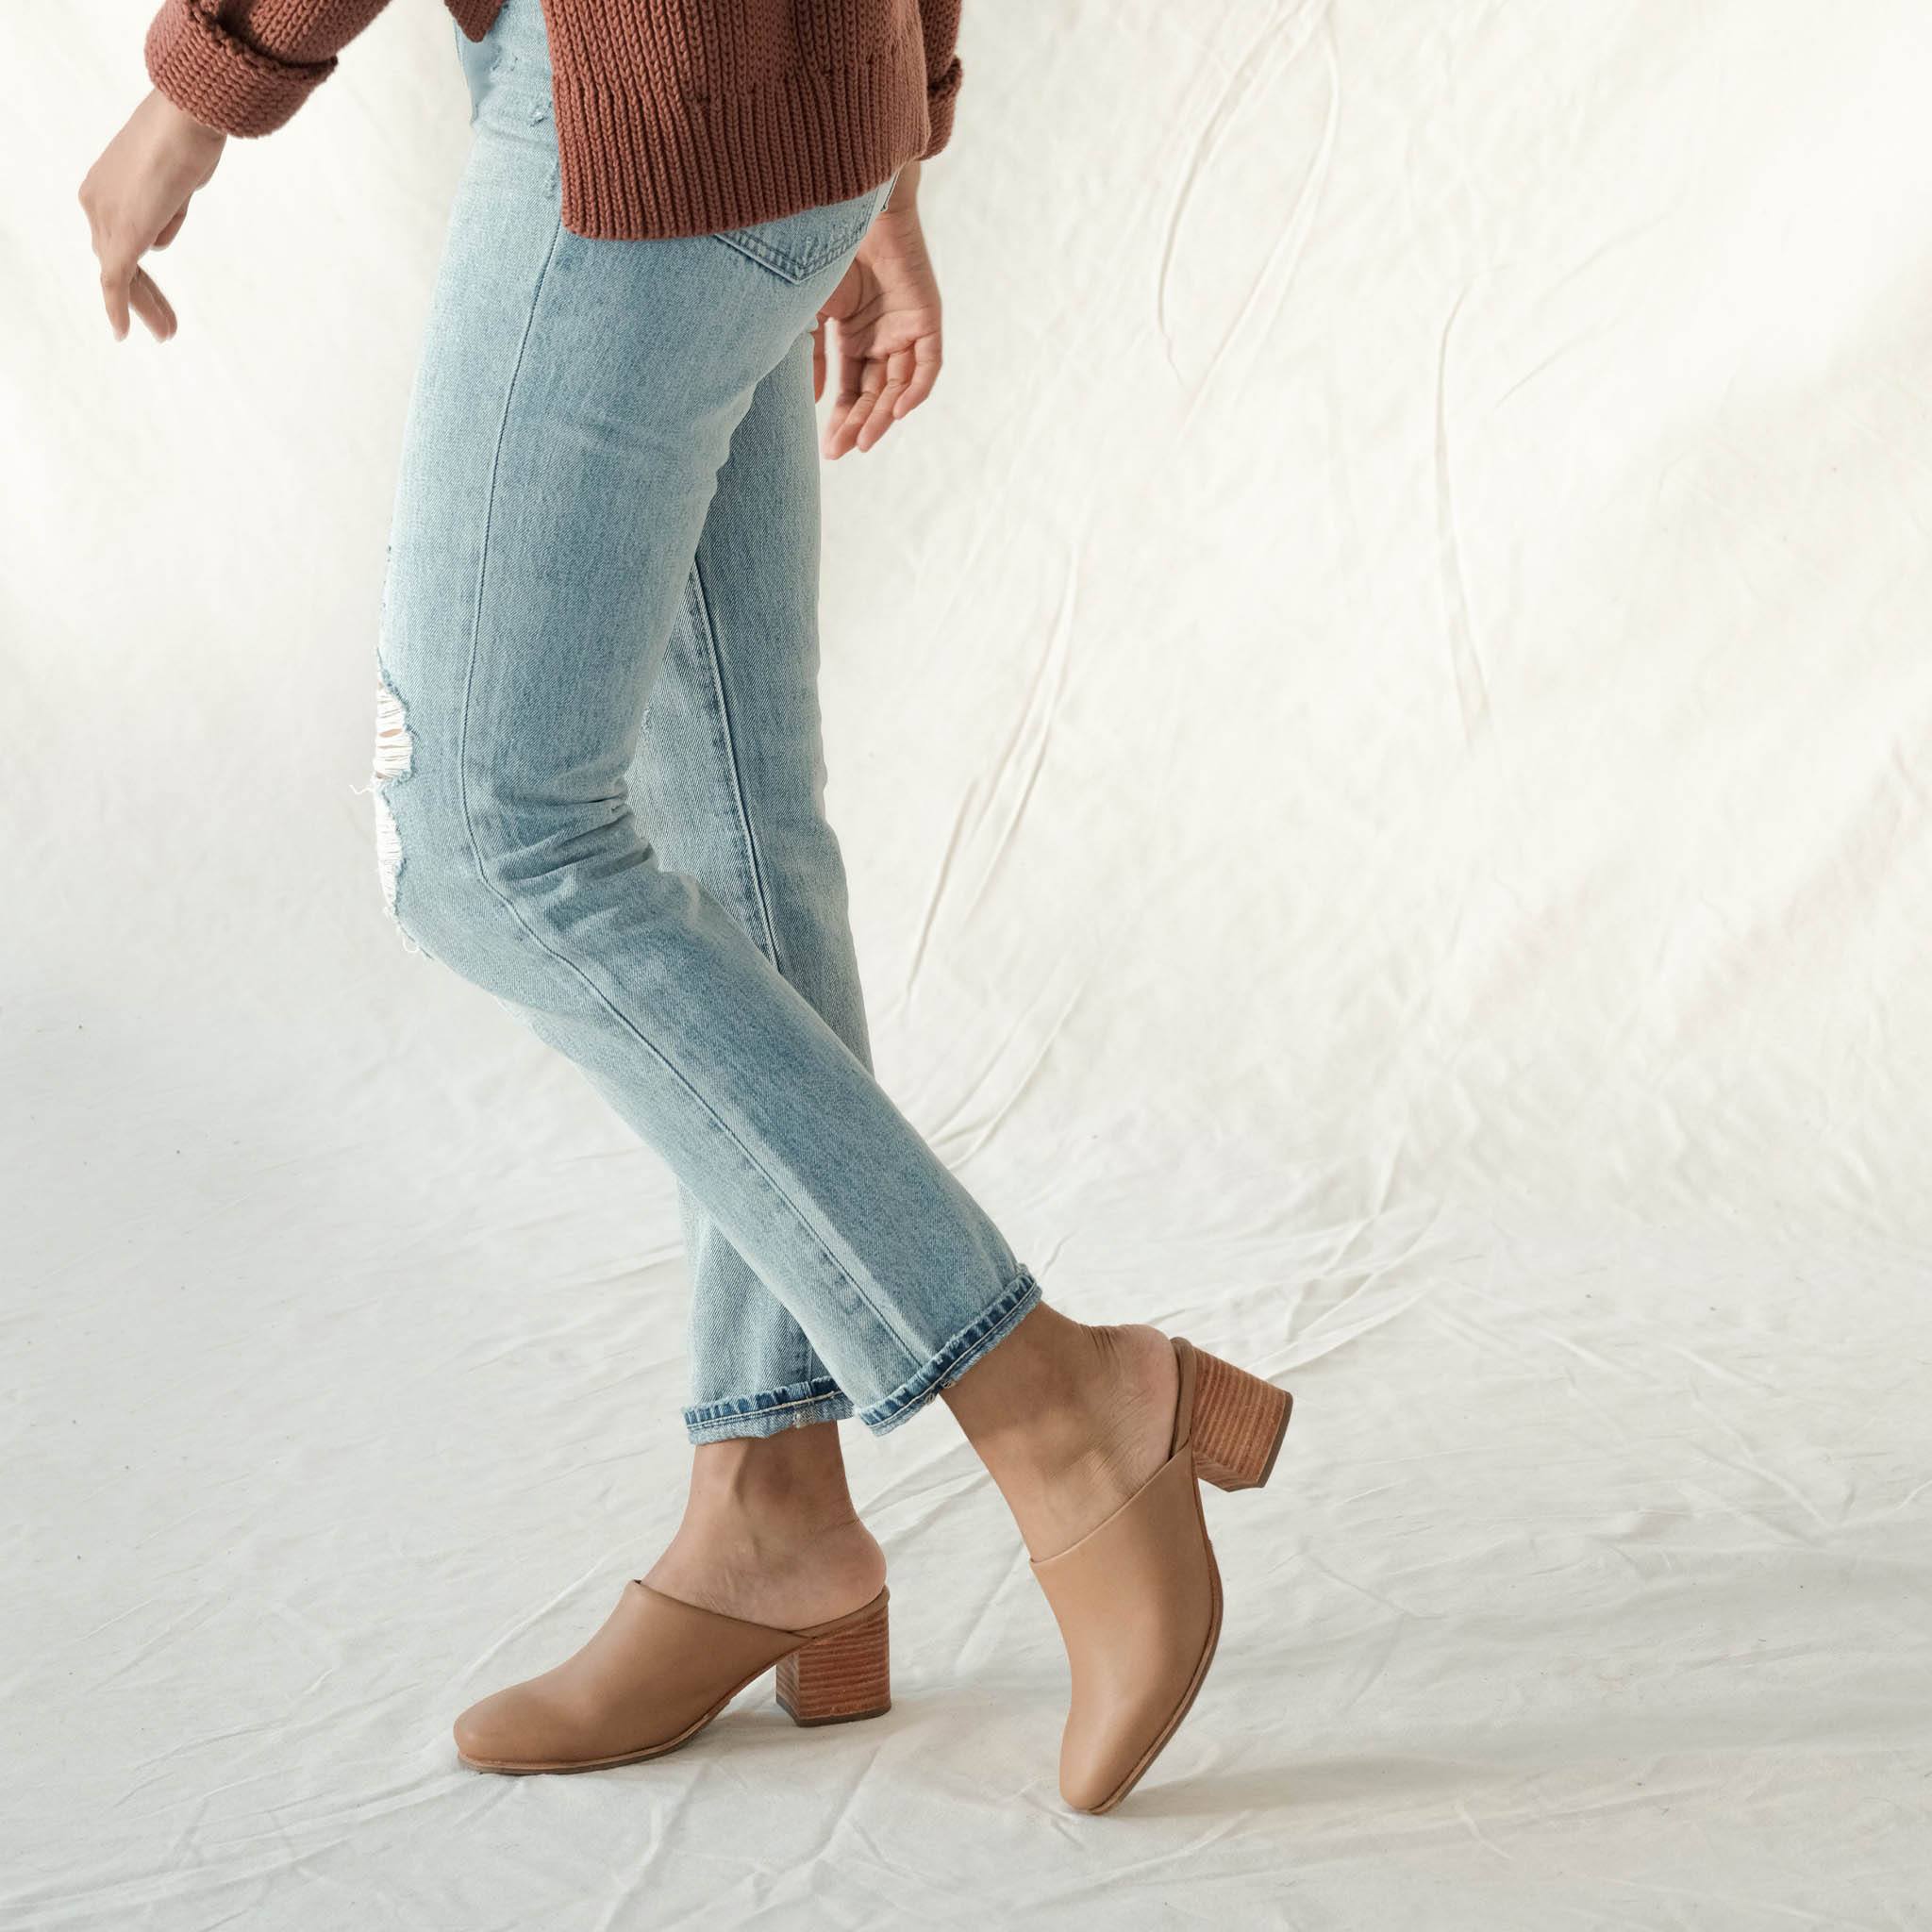 Image 3 of the All-Day Heeled Mule Almond on model